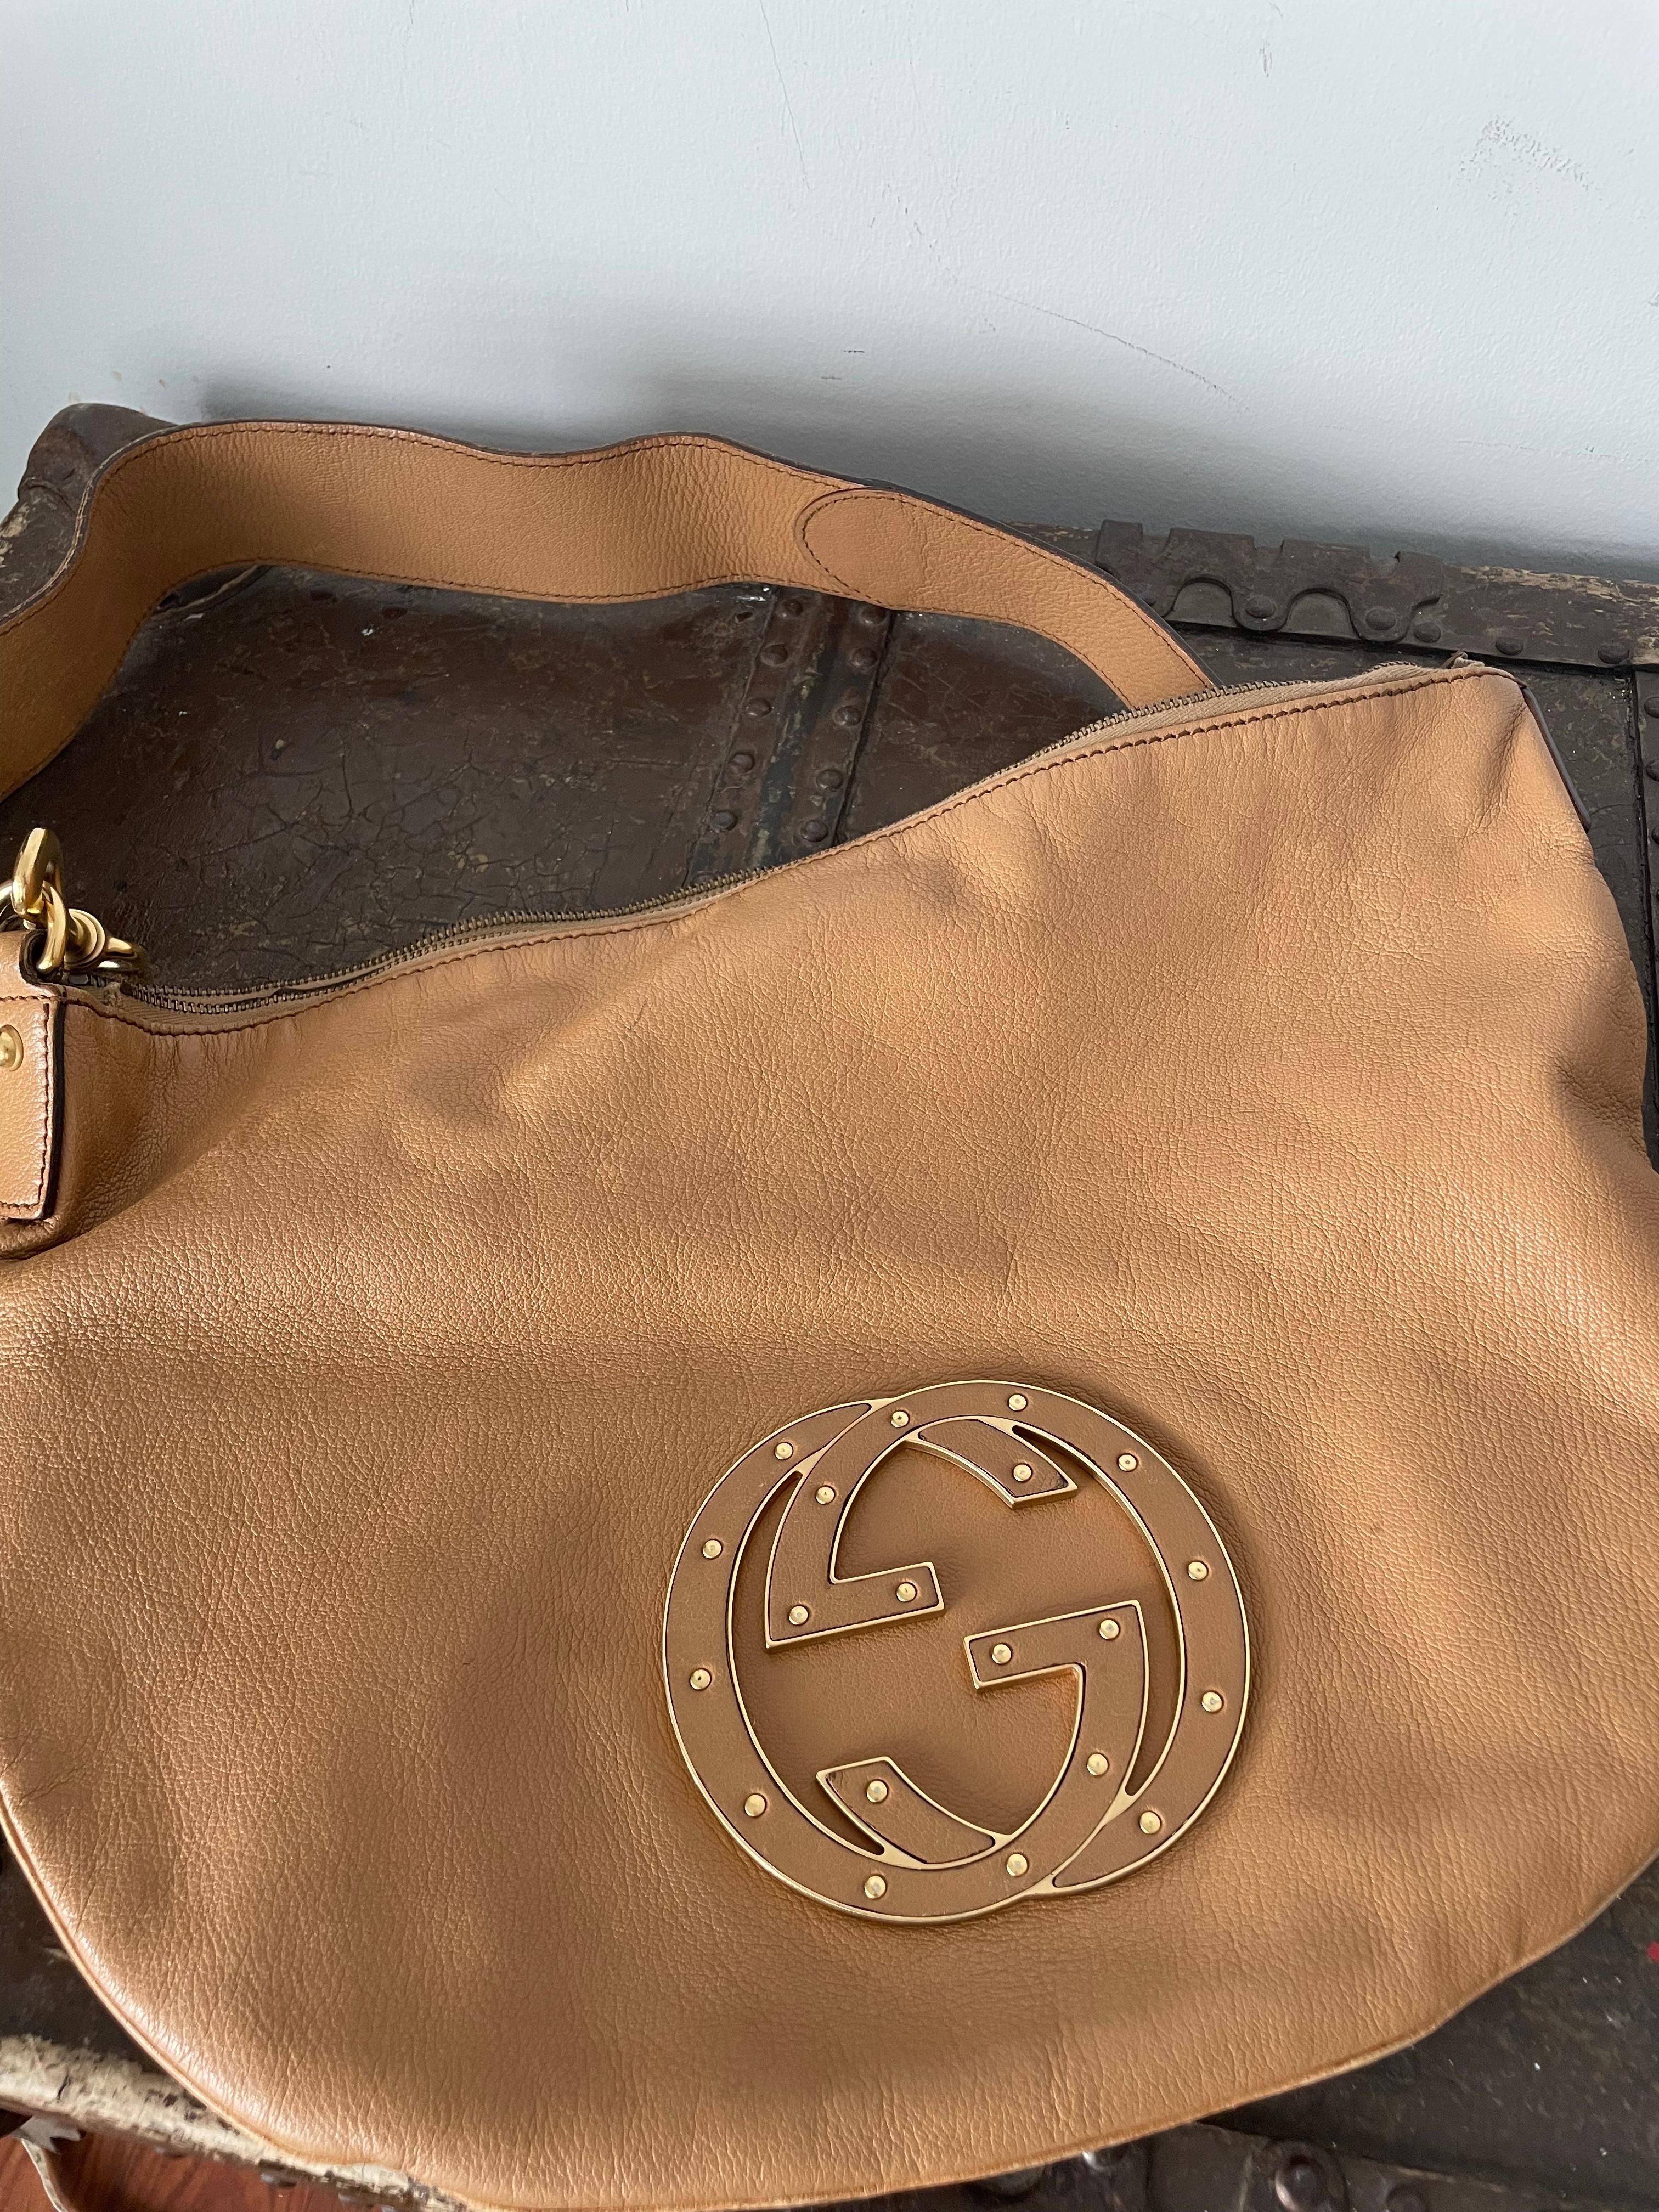 Description:Elevate your accessory game with the Gucci Half Moon Shape Cross Body Leather Bag in a versatile camel color. This bag combines luxury and practicality, making it a must-have for any fashion enthusiast. Its unique moon shape and